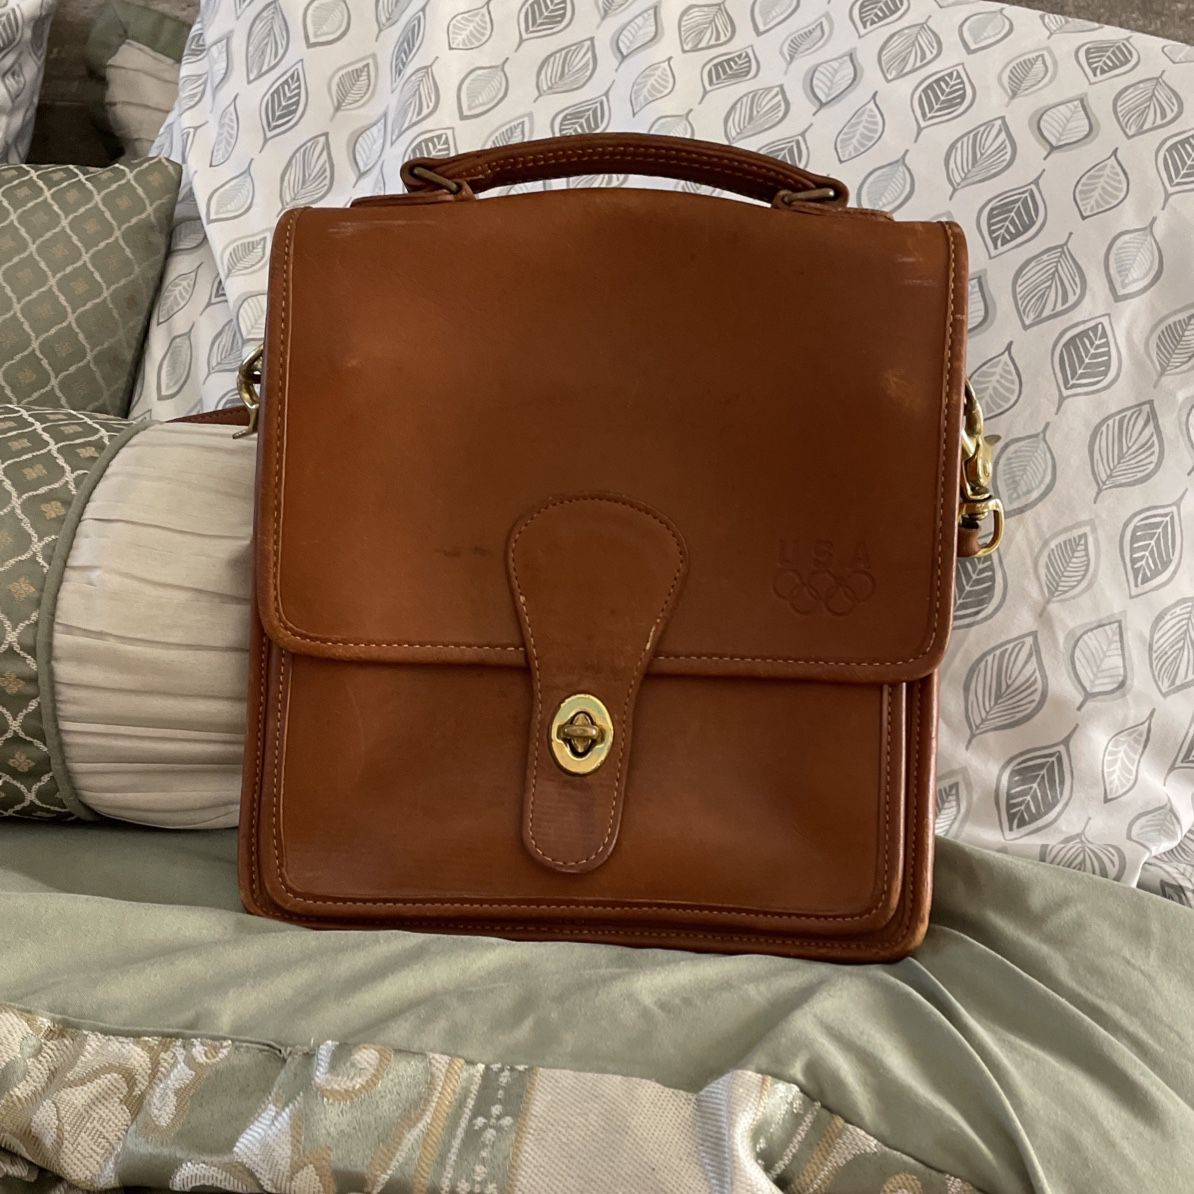 Original Coach Purse for Sale in New York, NY - OfferUp